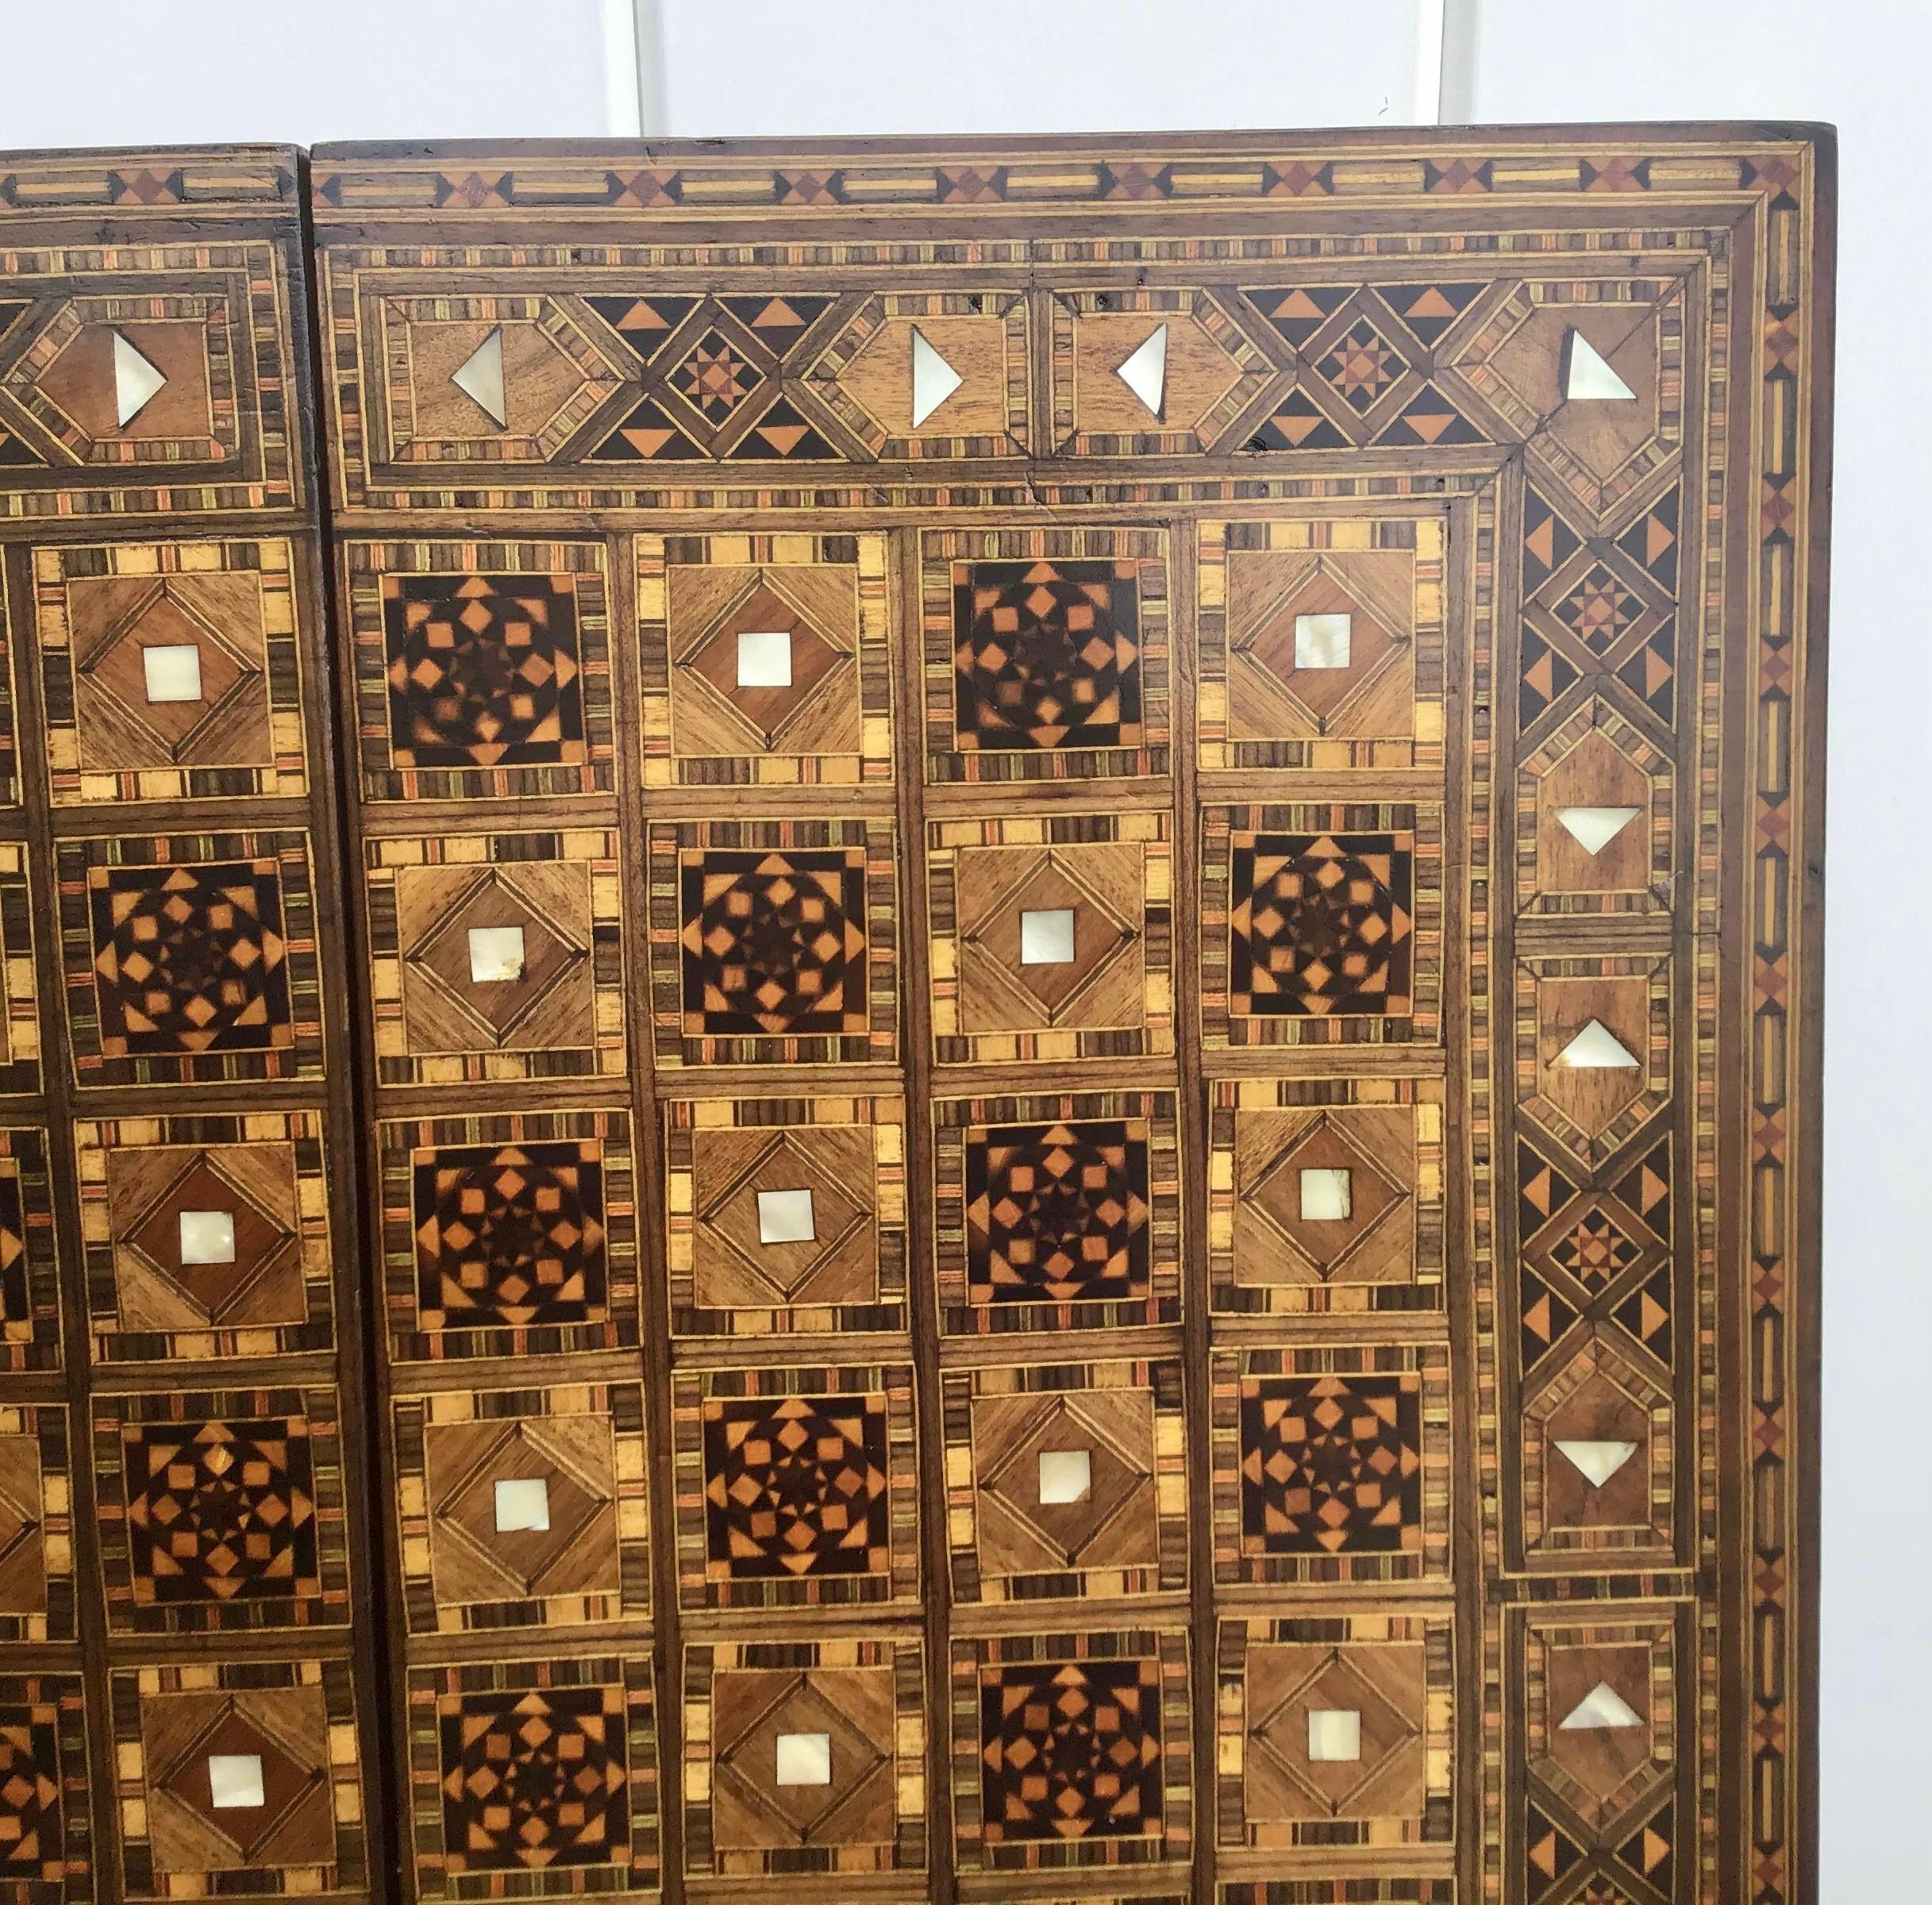 Large vintage Syrian inlaid with mother of pearl mosaic backgammon and chess game board. Great inlaid micro mosaic hinged marquetry game board features a chess and checker board on the exterior and felt board on the interior. Displaying intricate